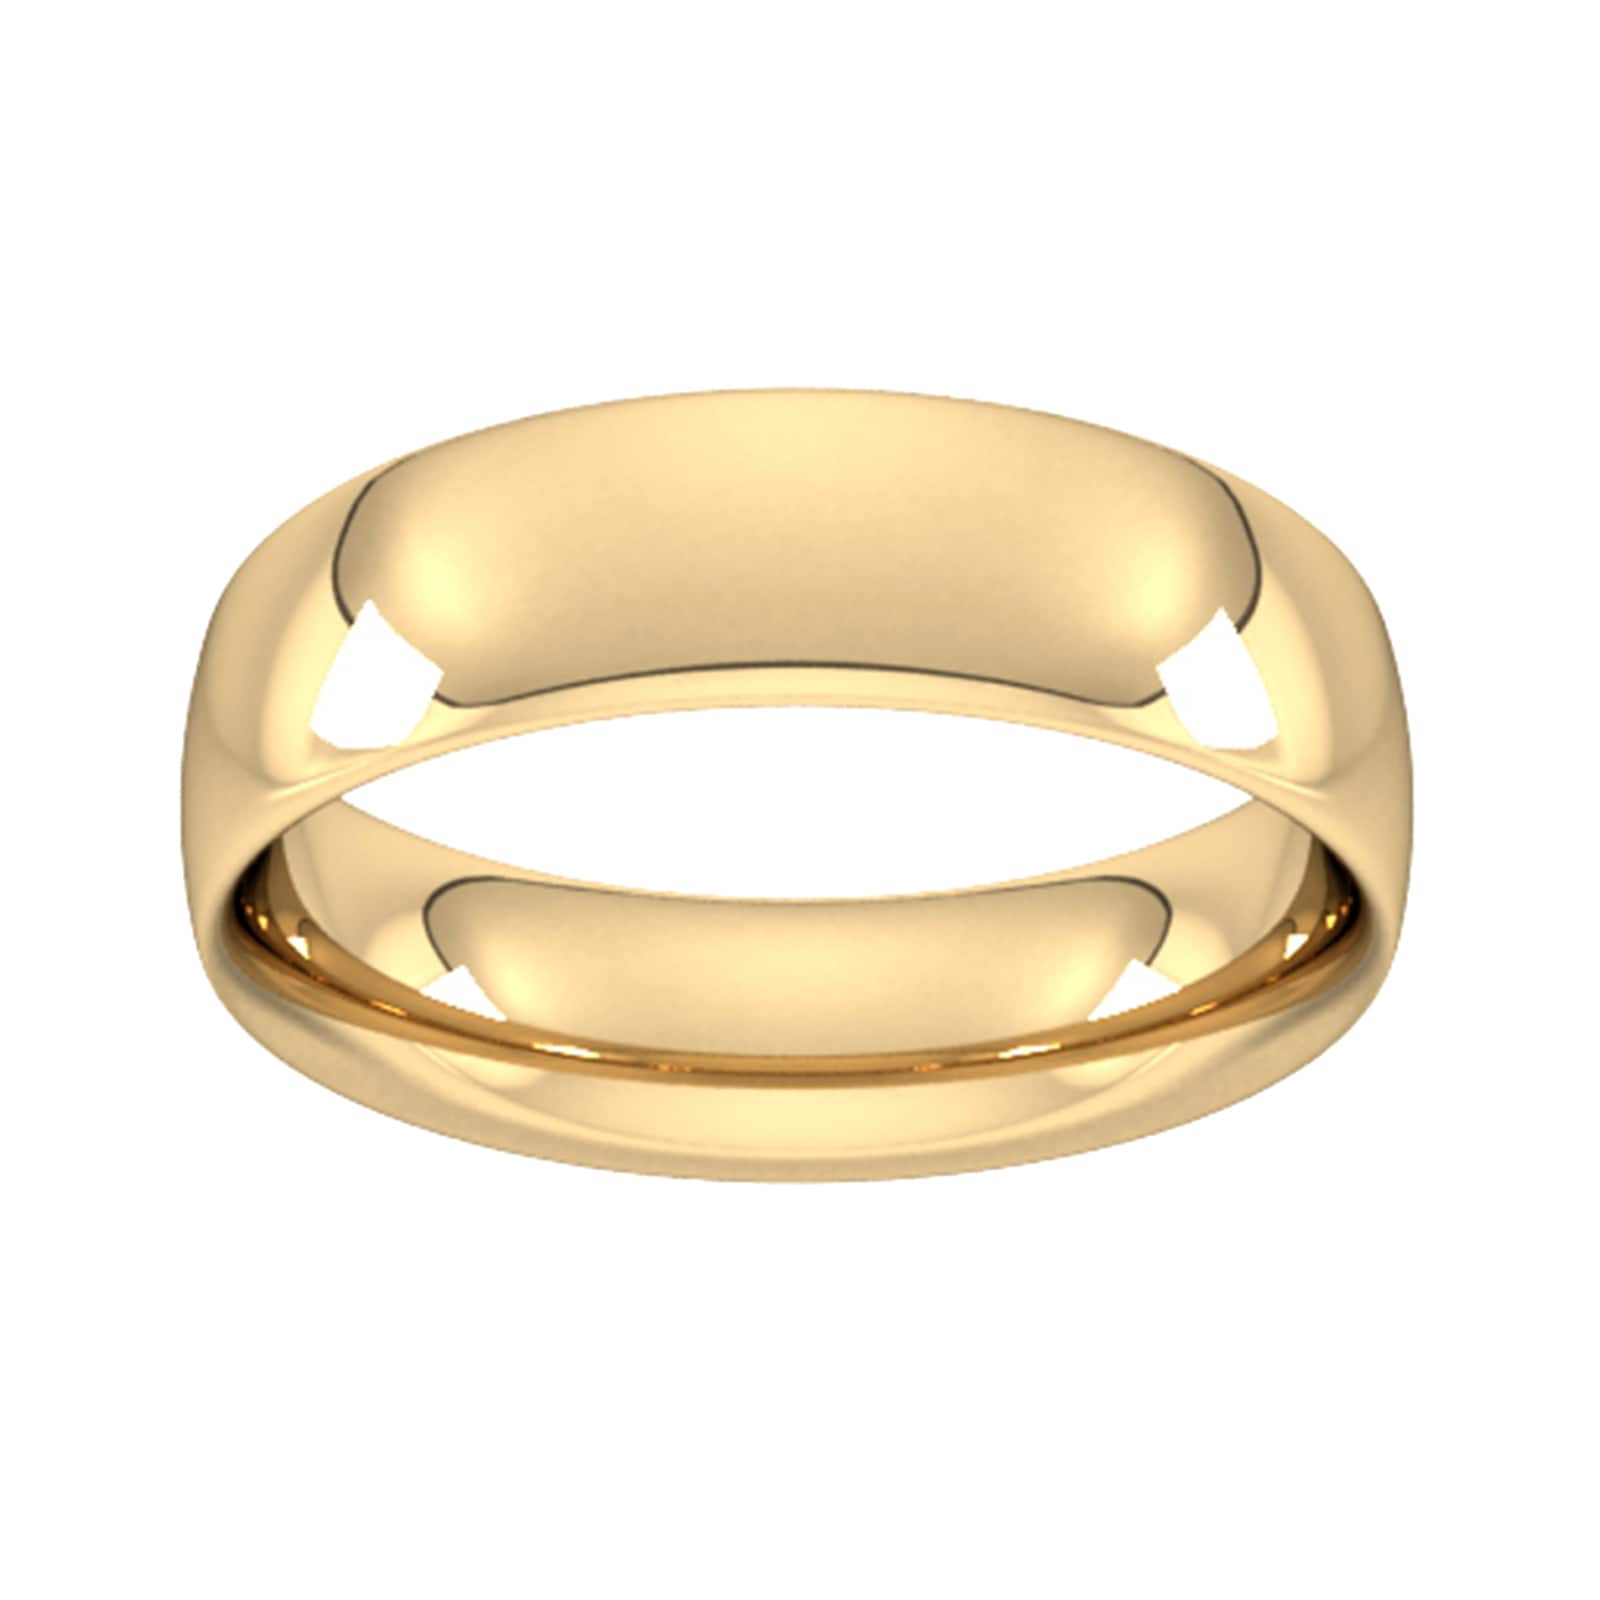 6mm Traditional Court Heavy Wedding Ring In 18 Carat Yellow Gold - Ring Size S